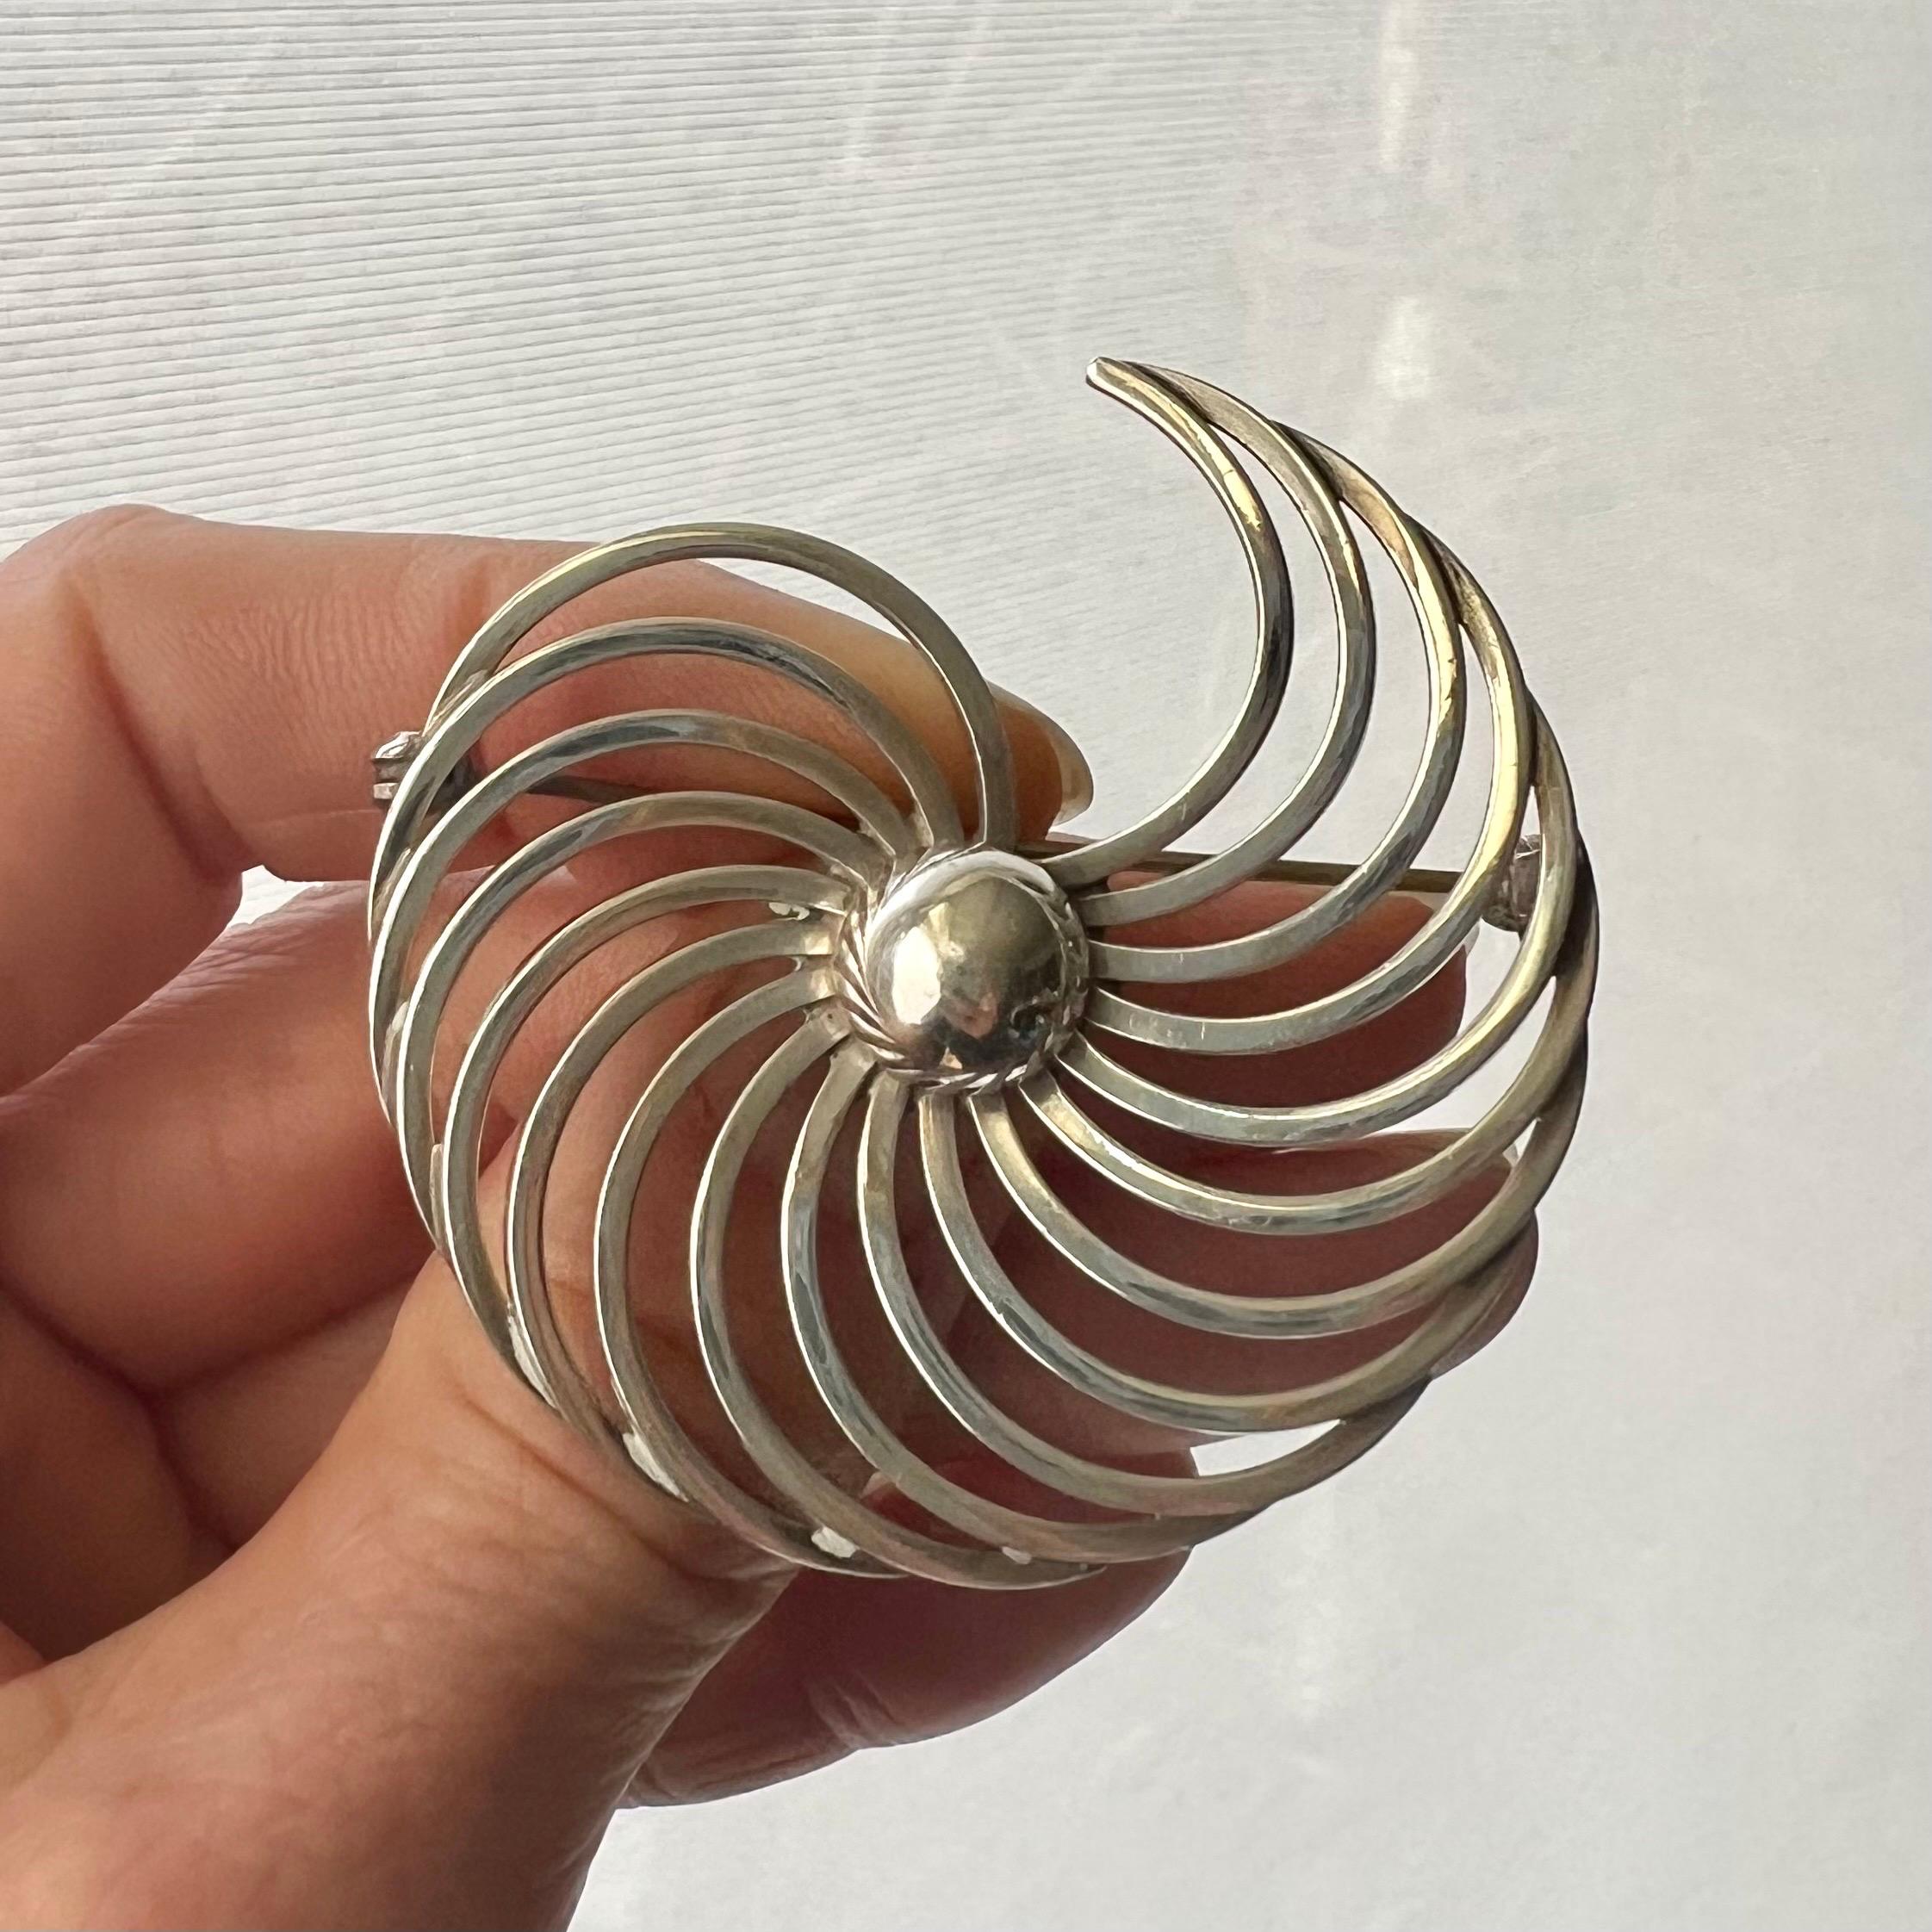 This vintage 1960's sterling silver brooch is created in a swirl design. The brooch is crafted in sterling silver and has a typical 1960's and 1970's modernist design. The center of the brooch is set with a knot. The fabulous design gives movement